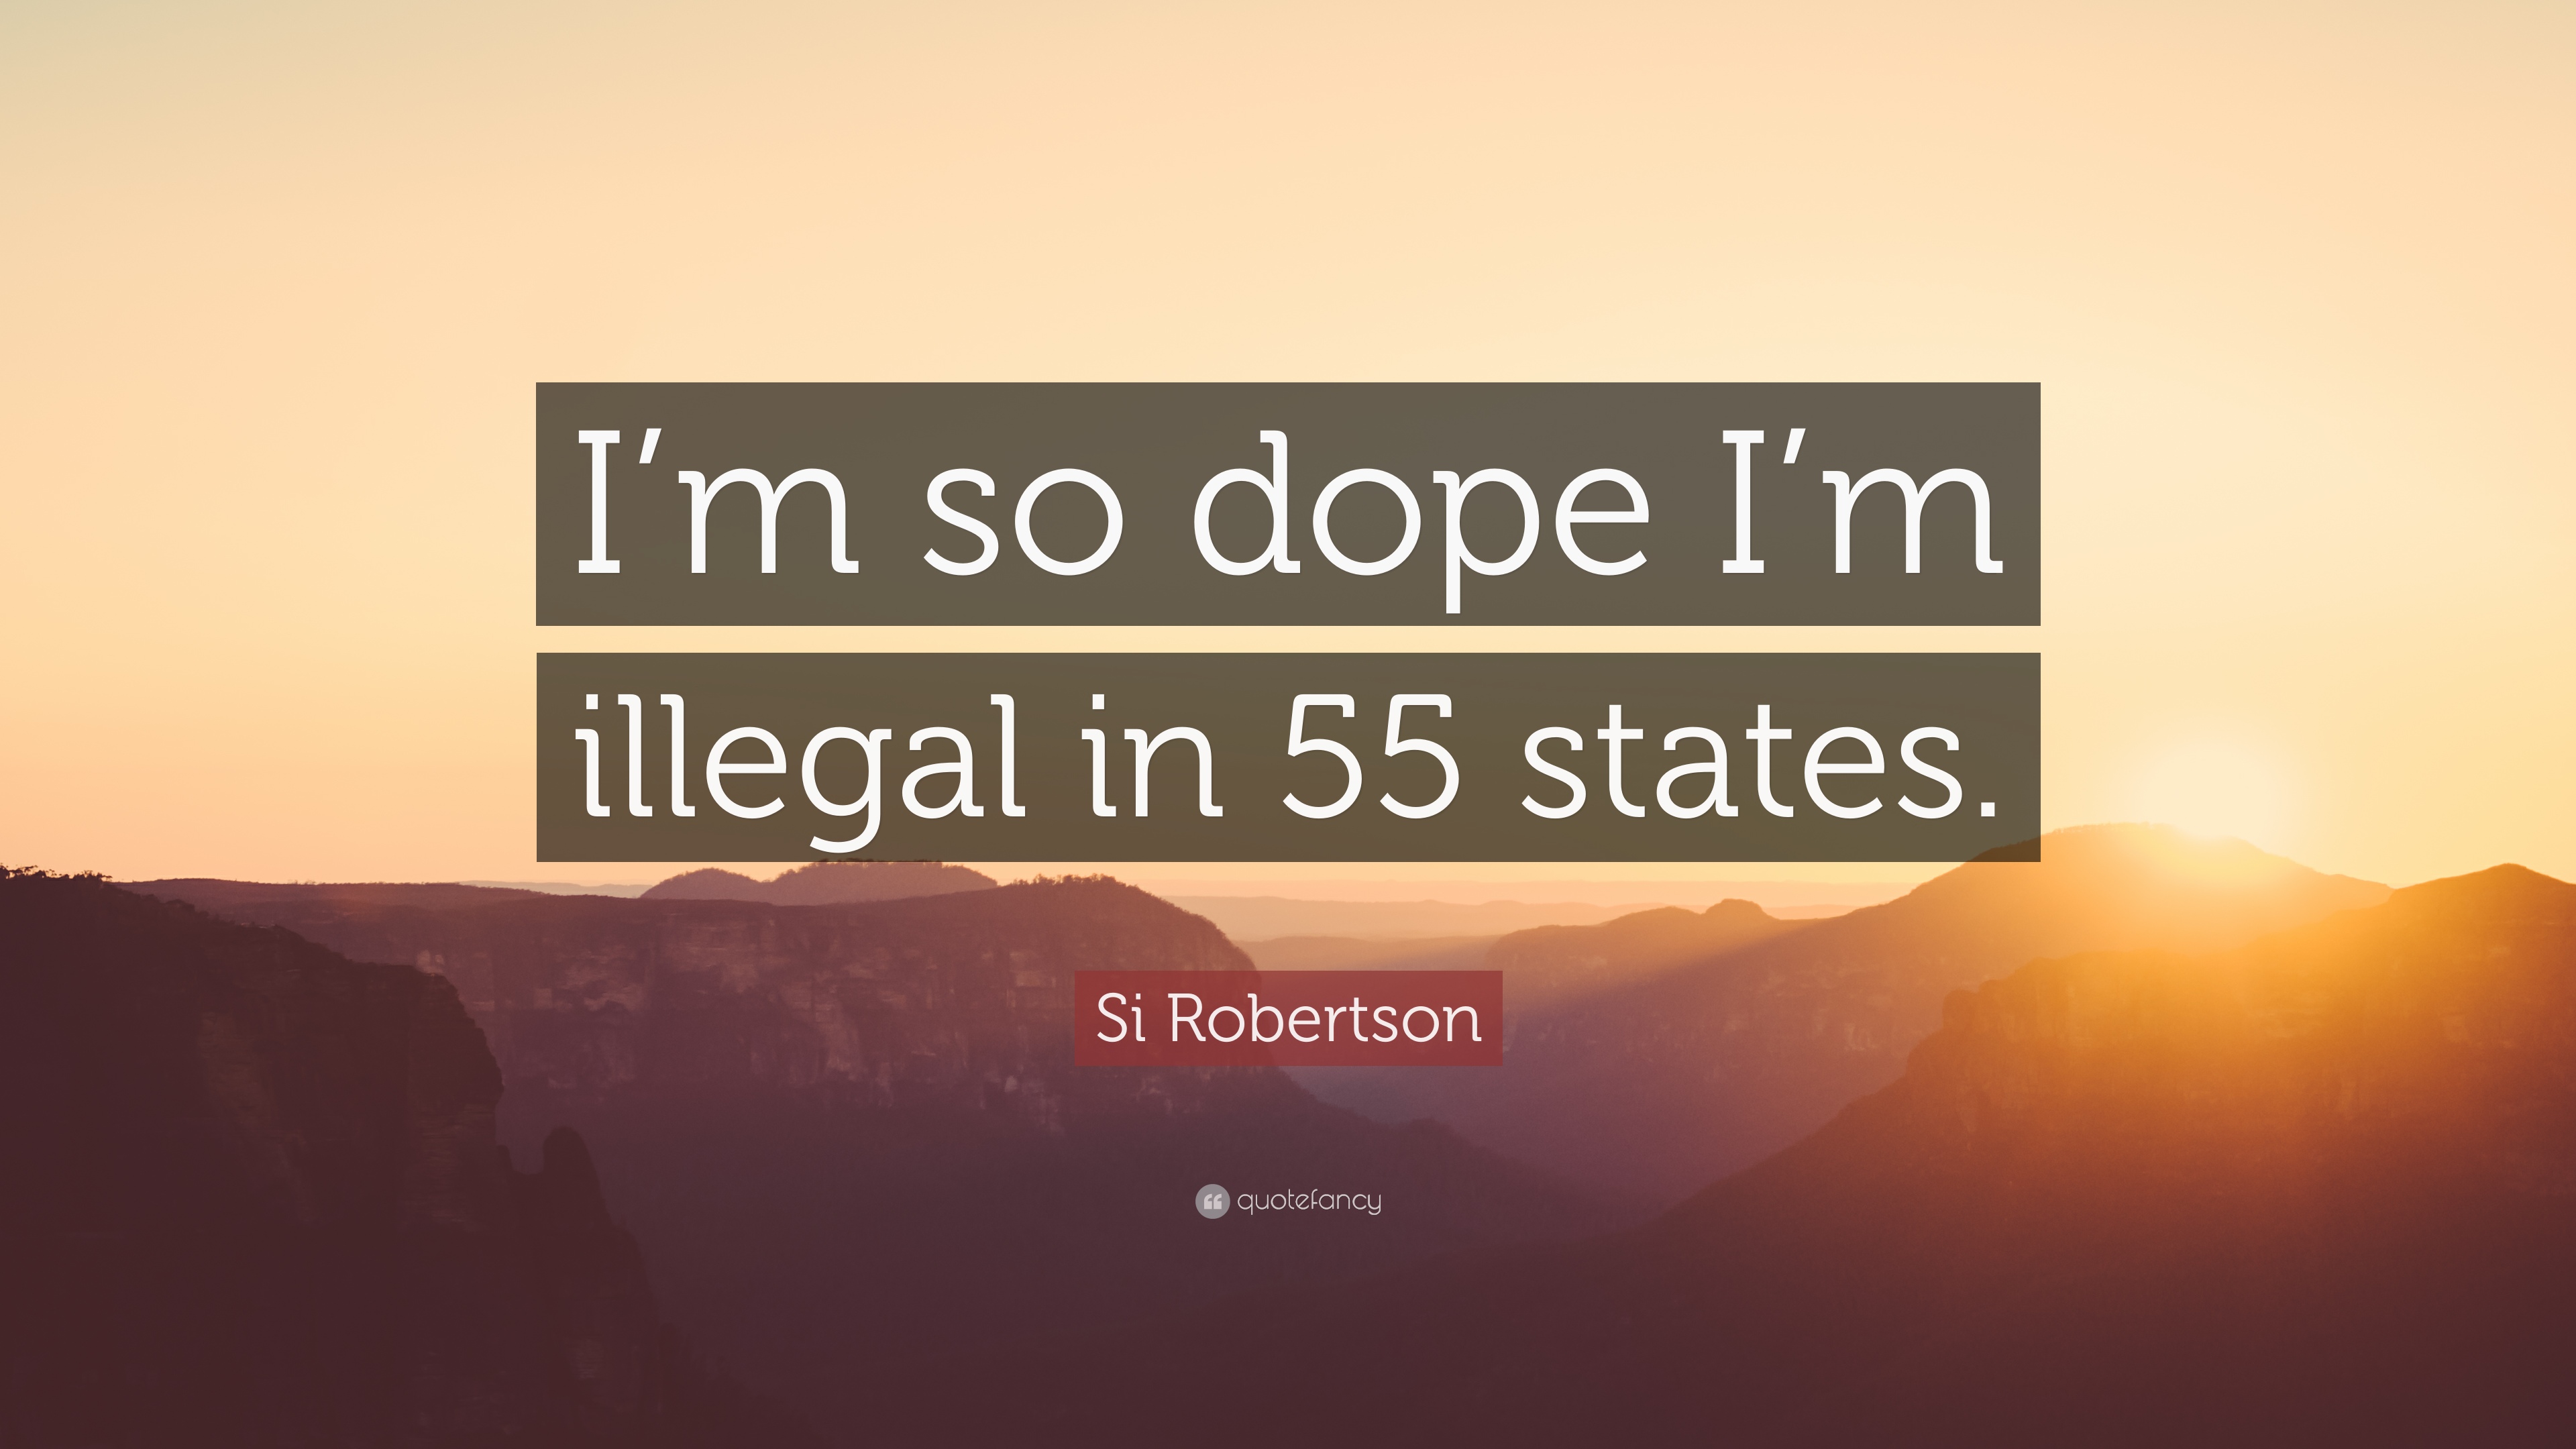 Si Robertson Quote: “I'm so dope I'm illegal in 55 states.”